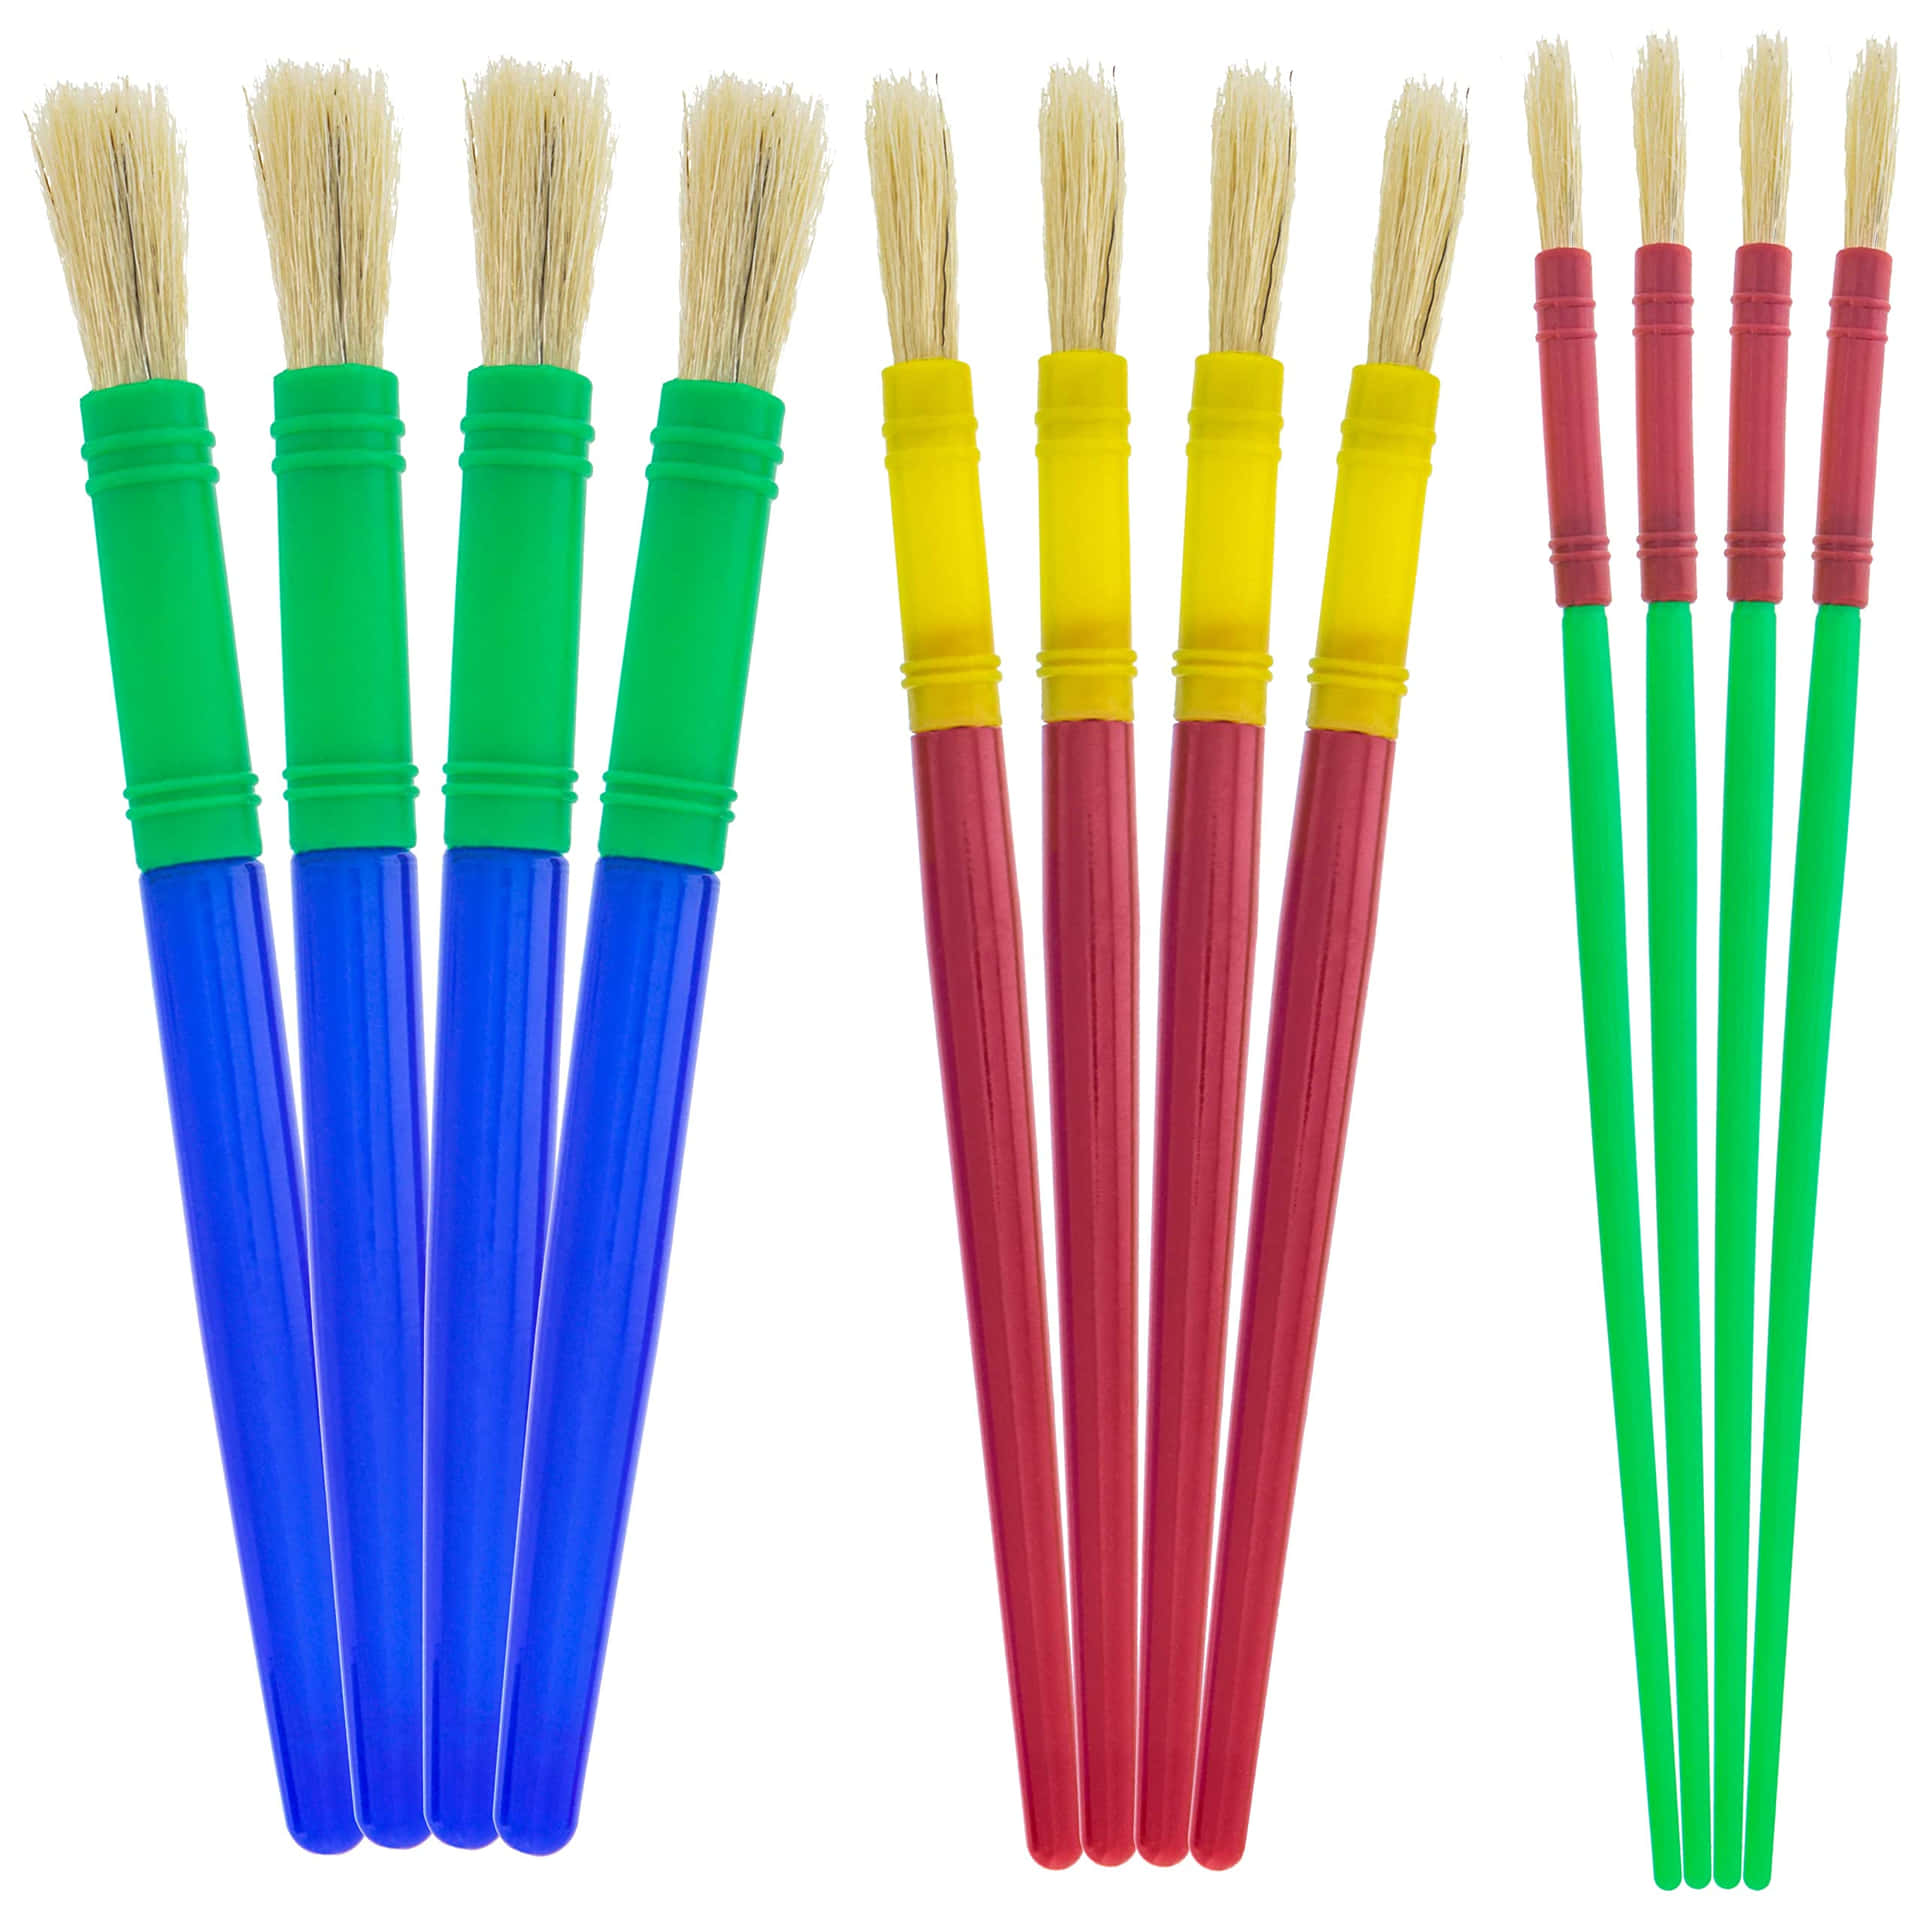 A Set Of Plastic Paint Brushes